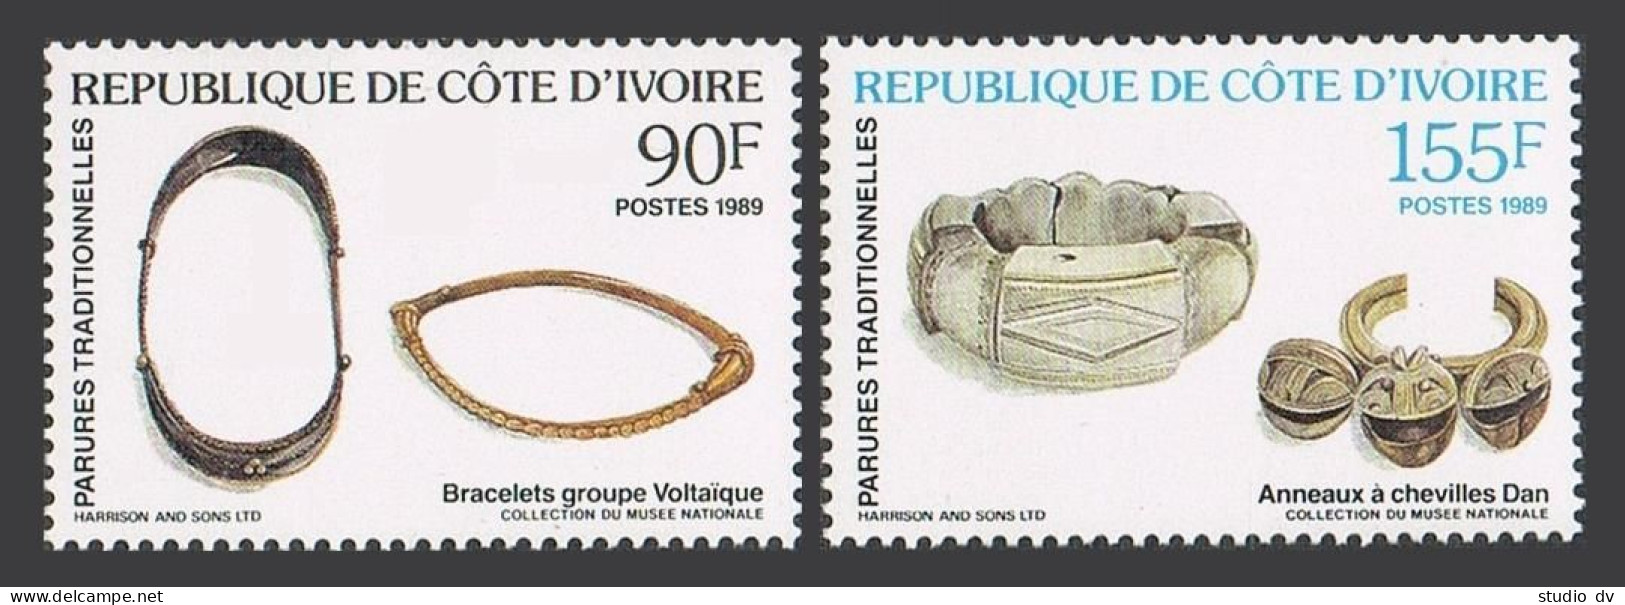 Ivory Coast 869-870, MNH. Michel 989-990. Jewelry From The National Museum,1989. - Ivory Coast (1960-...)